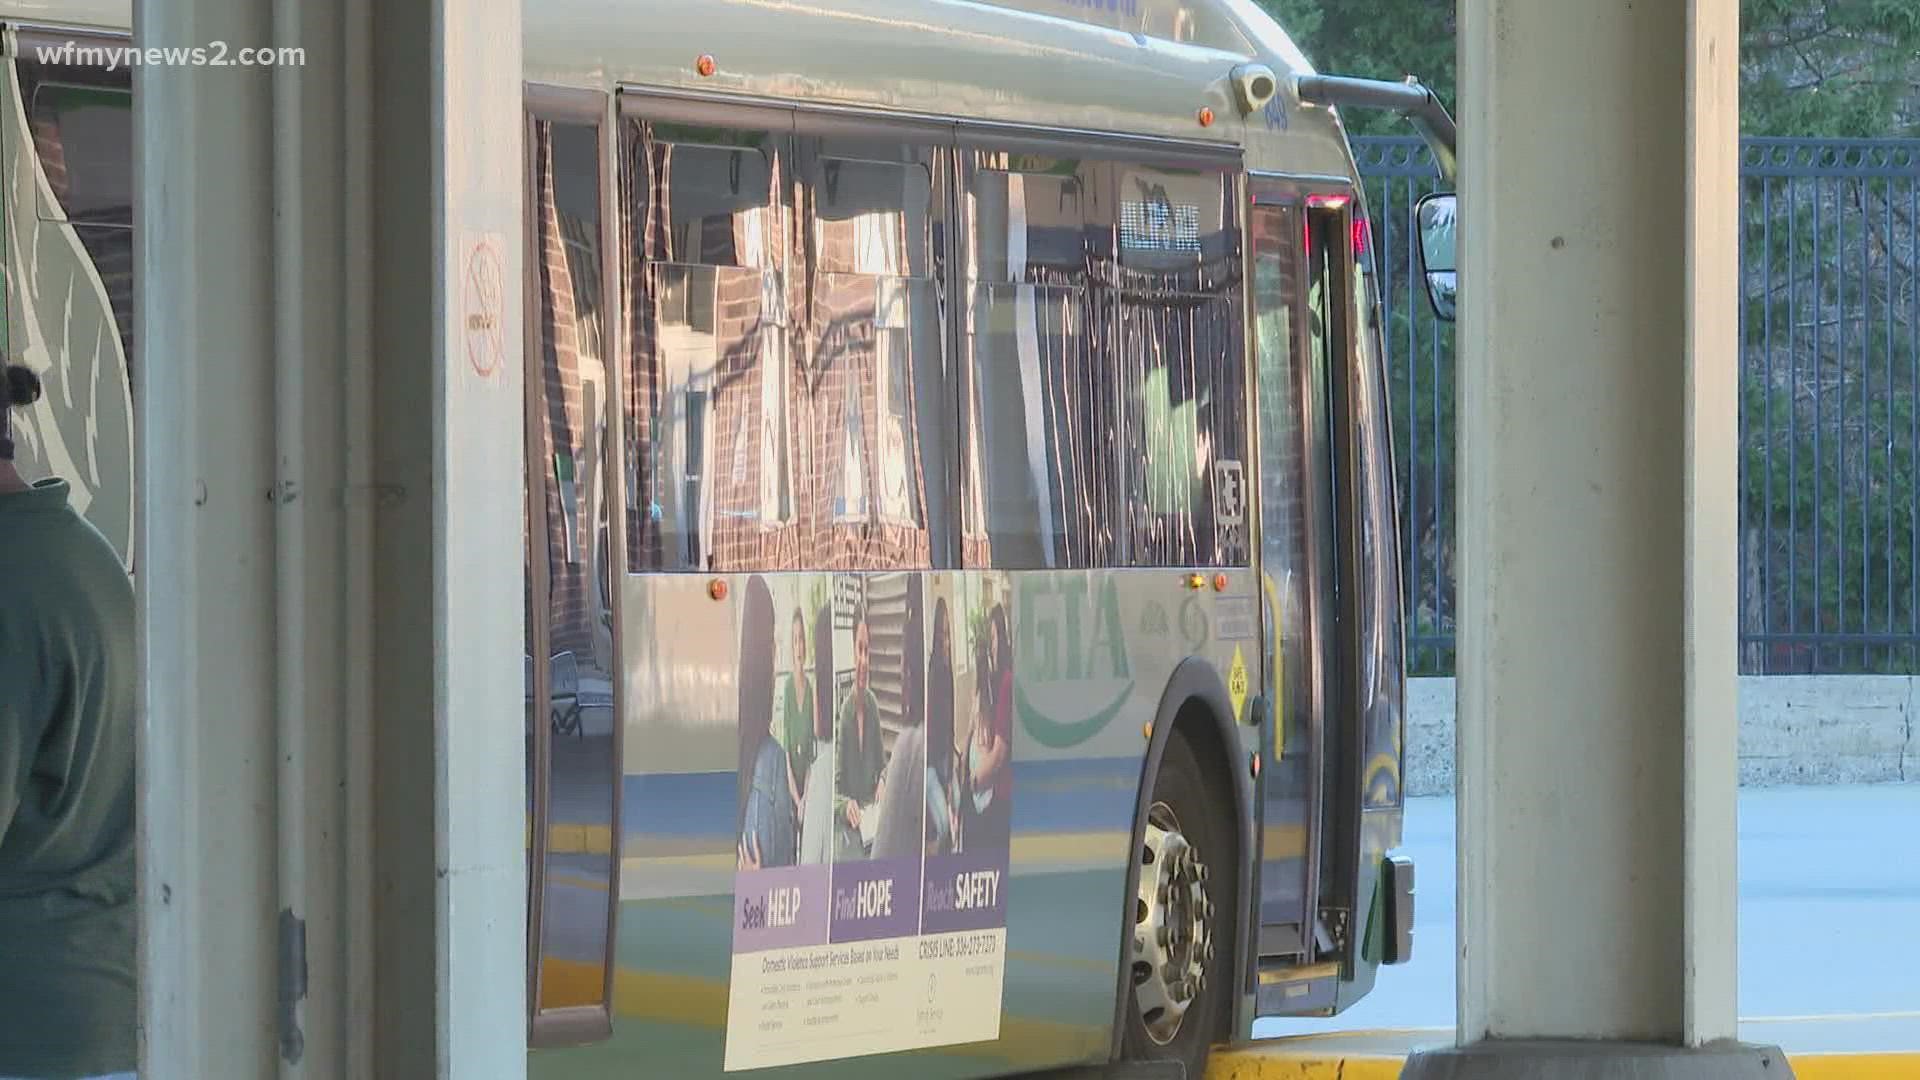 As Guilford County Schools struggle to fill bus driver vacancies, one staff member rode the city bus to learn what students have to go through.